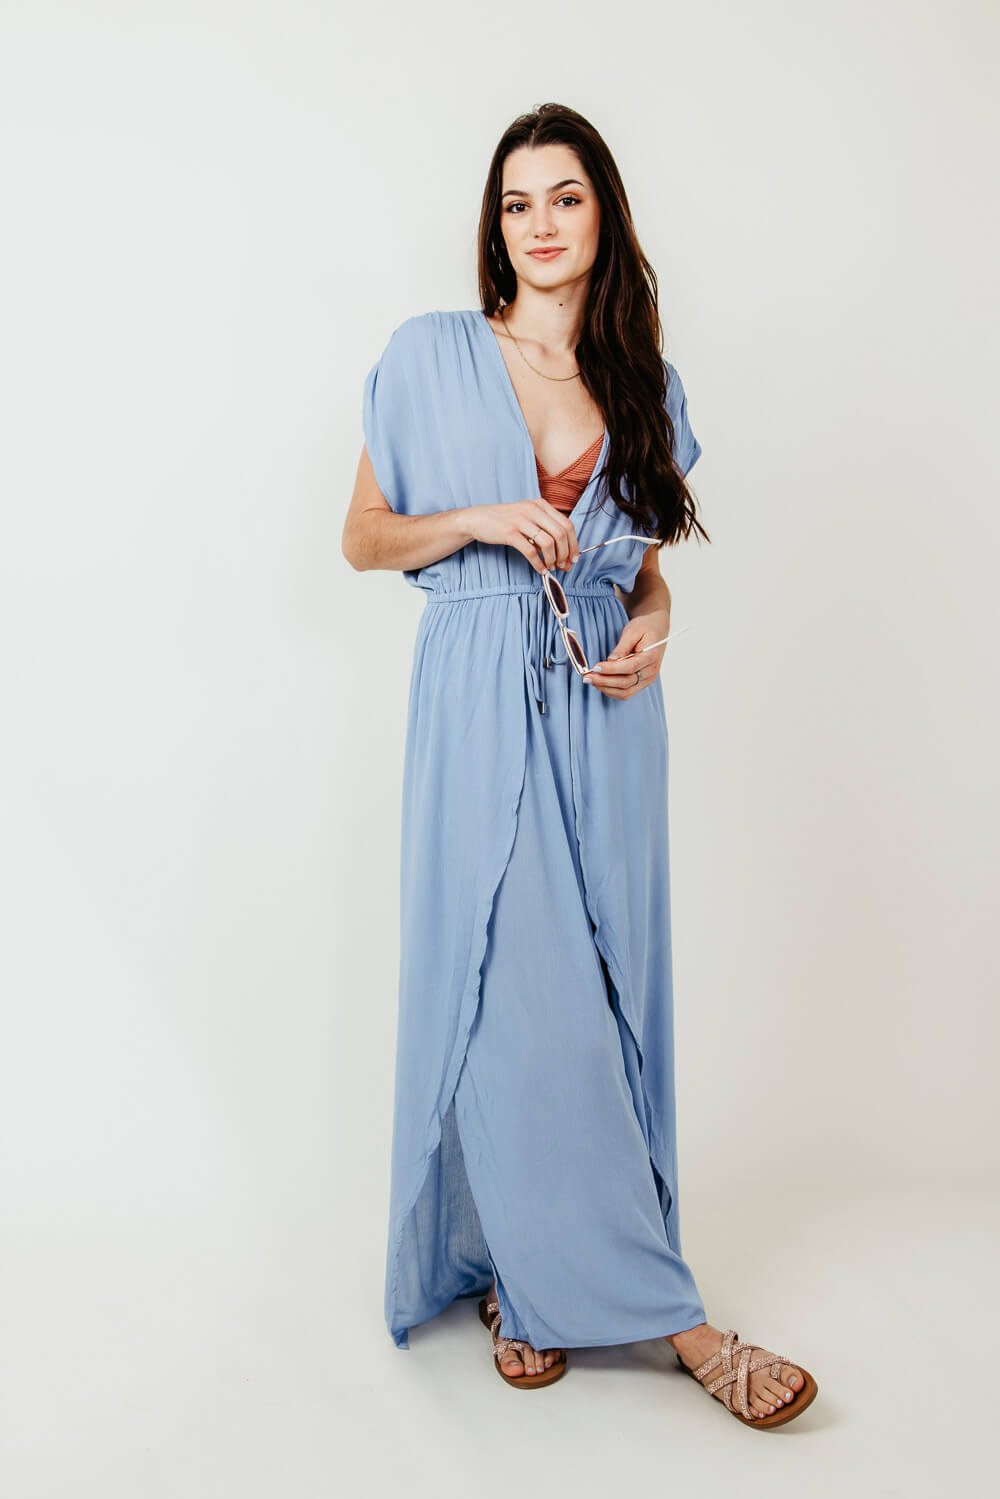 Elan Strapless Jumpsuit Cover-Up & Reviews